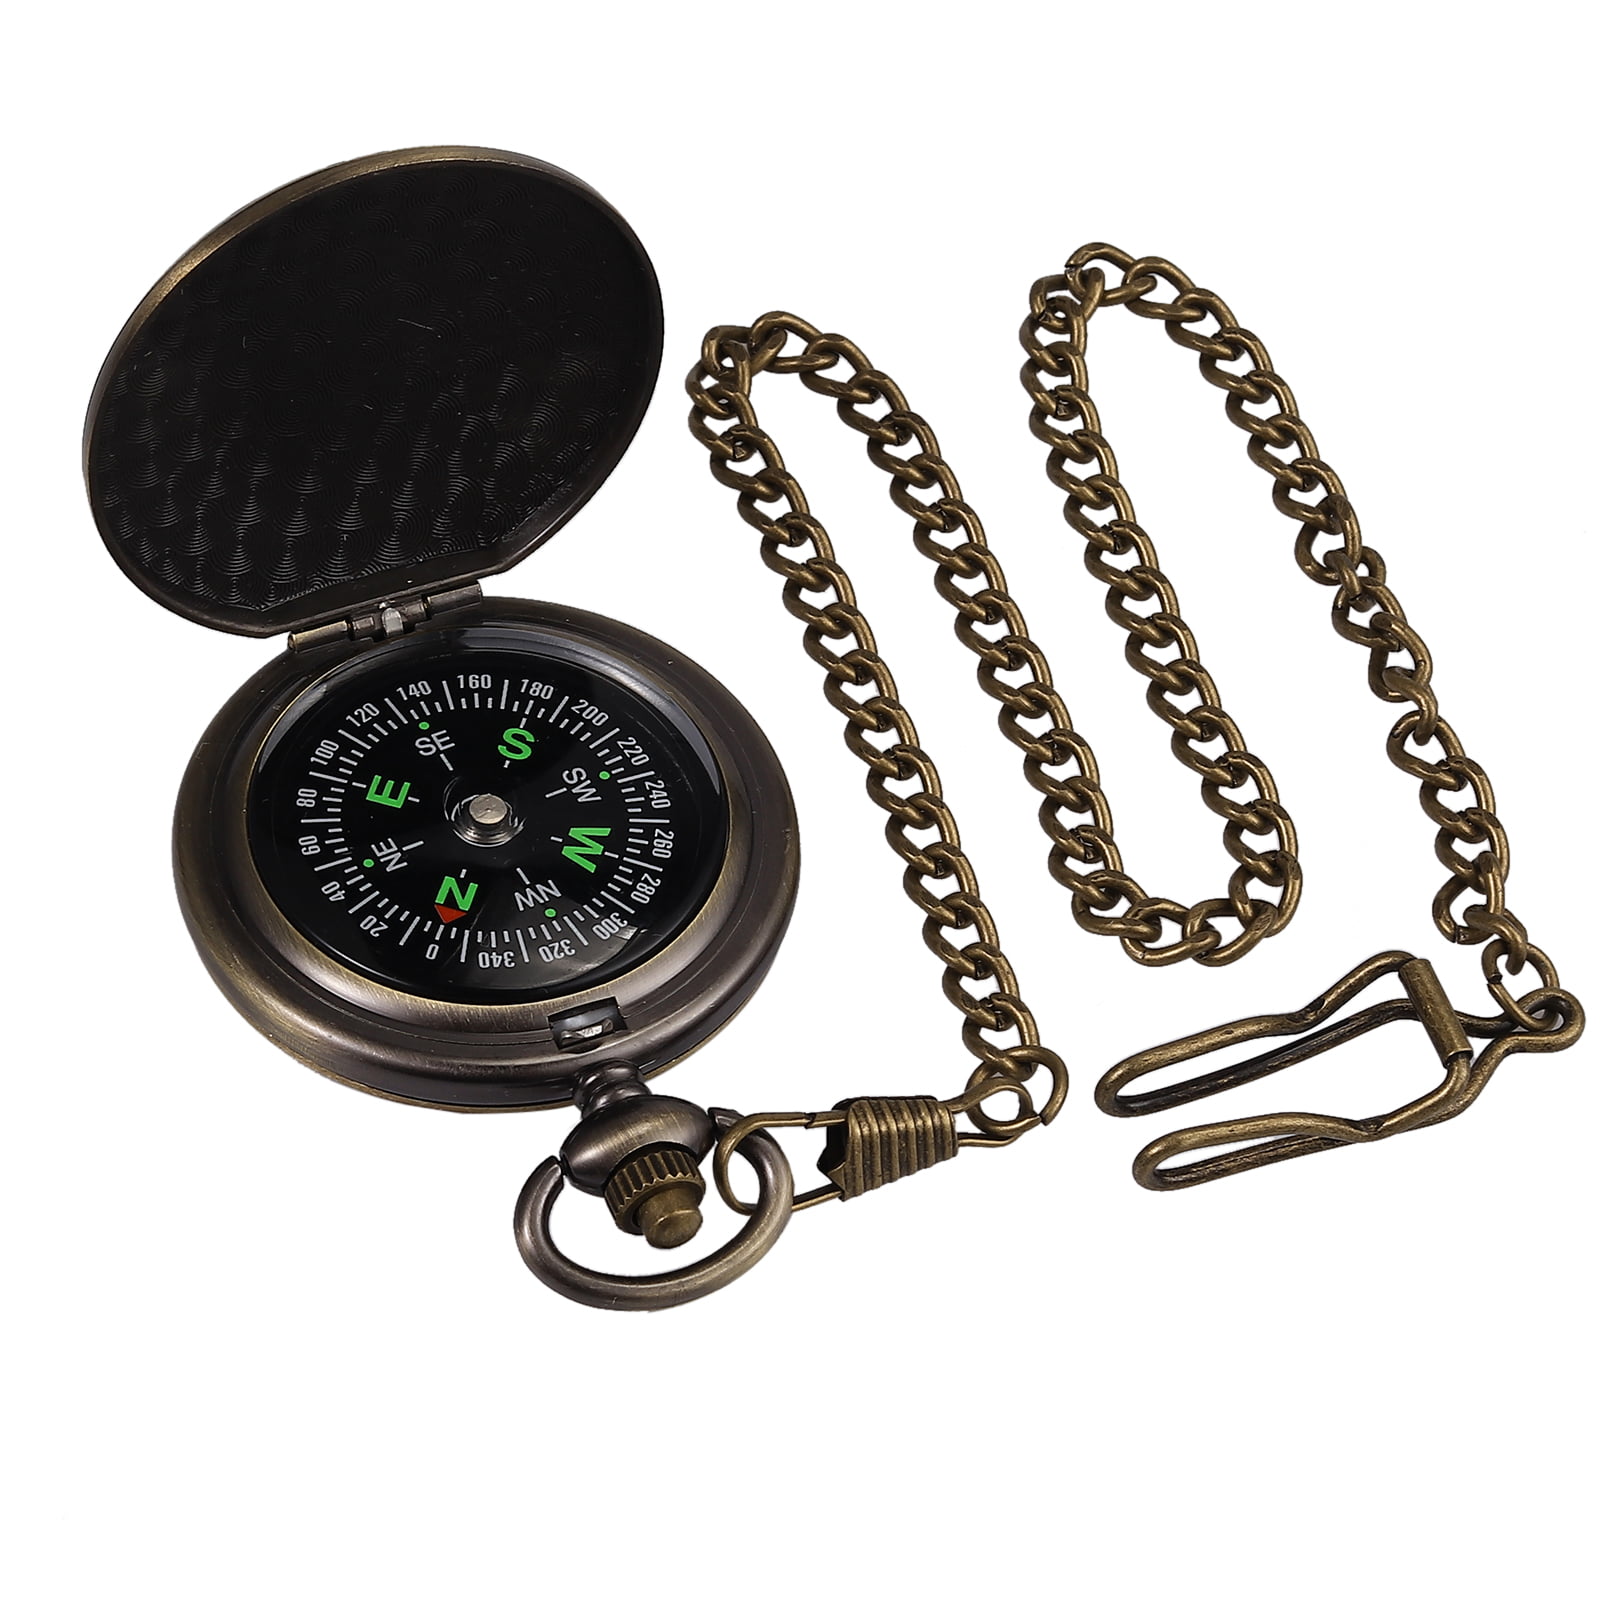 Waterproof Military Pocket Optical Sighting Compass Outdoor Hiking Camping